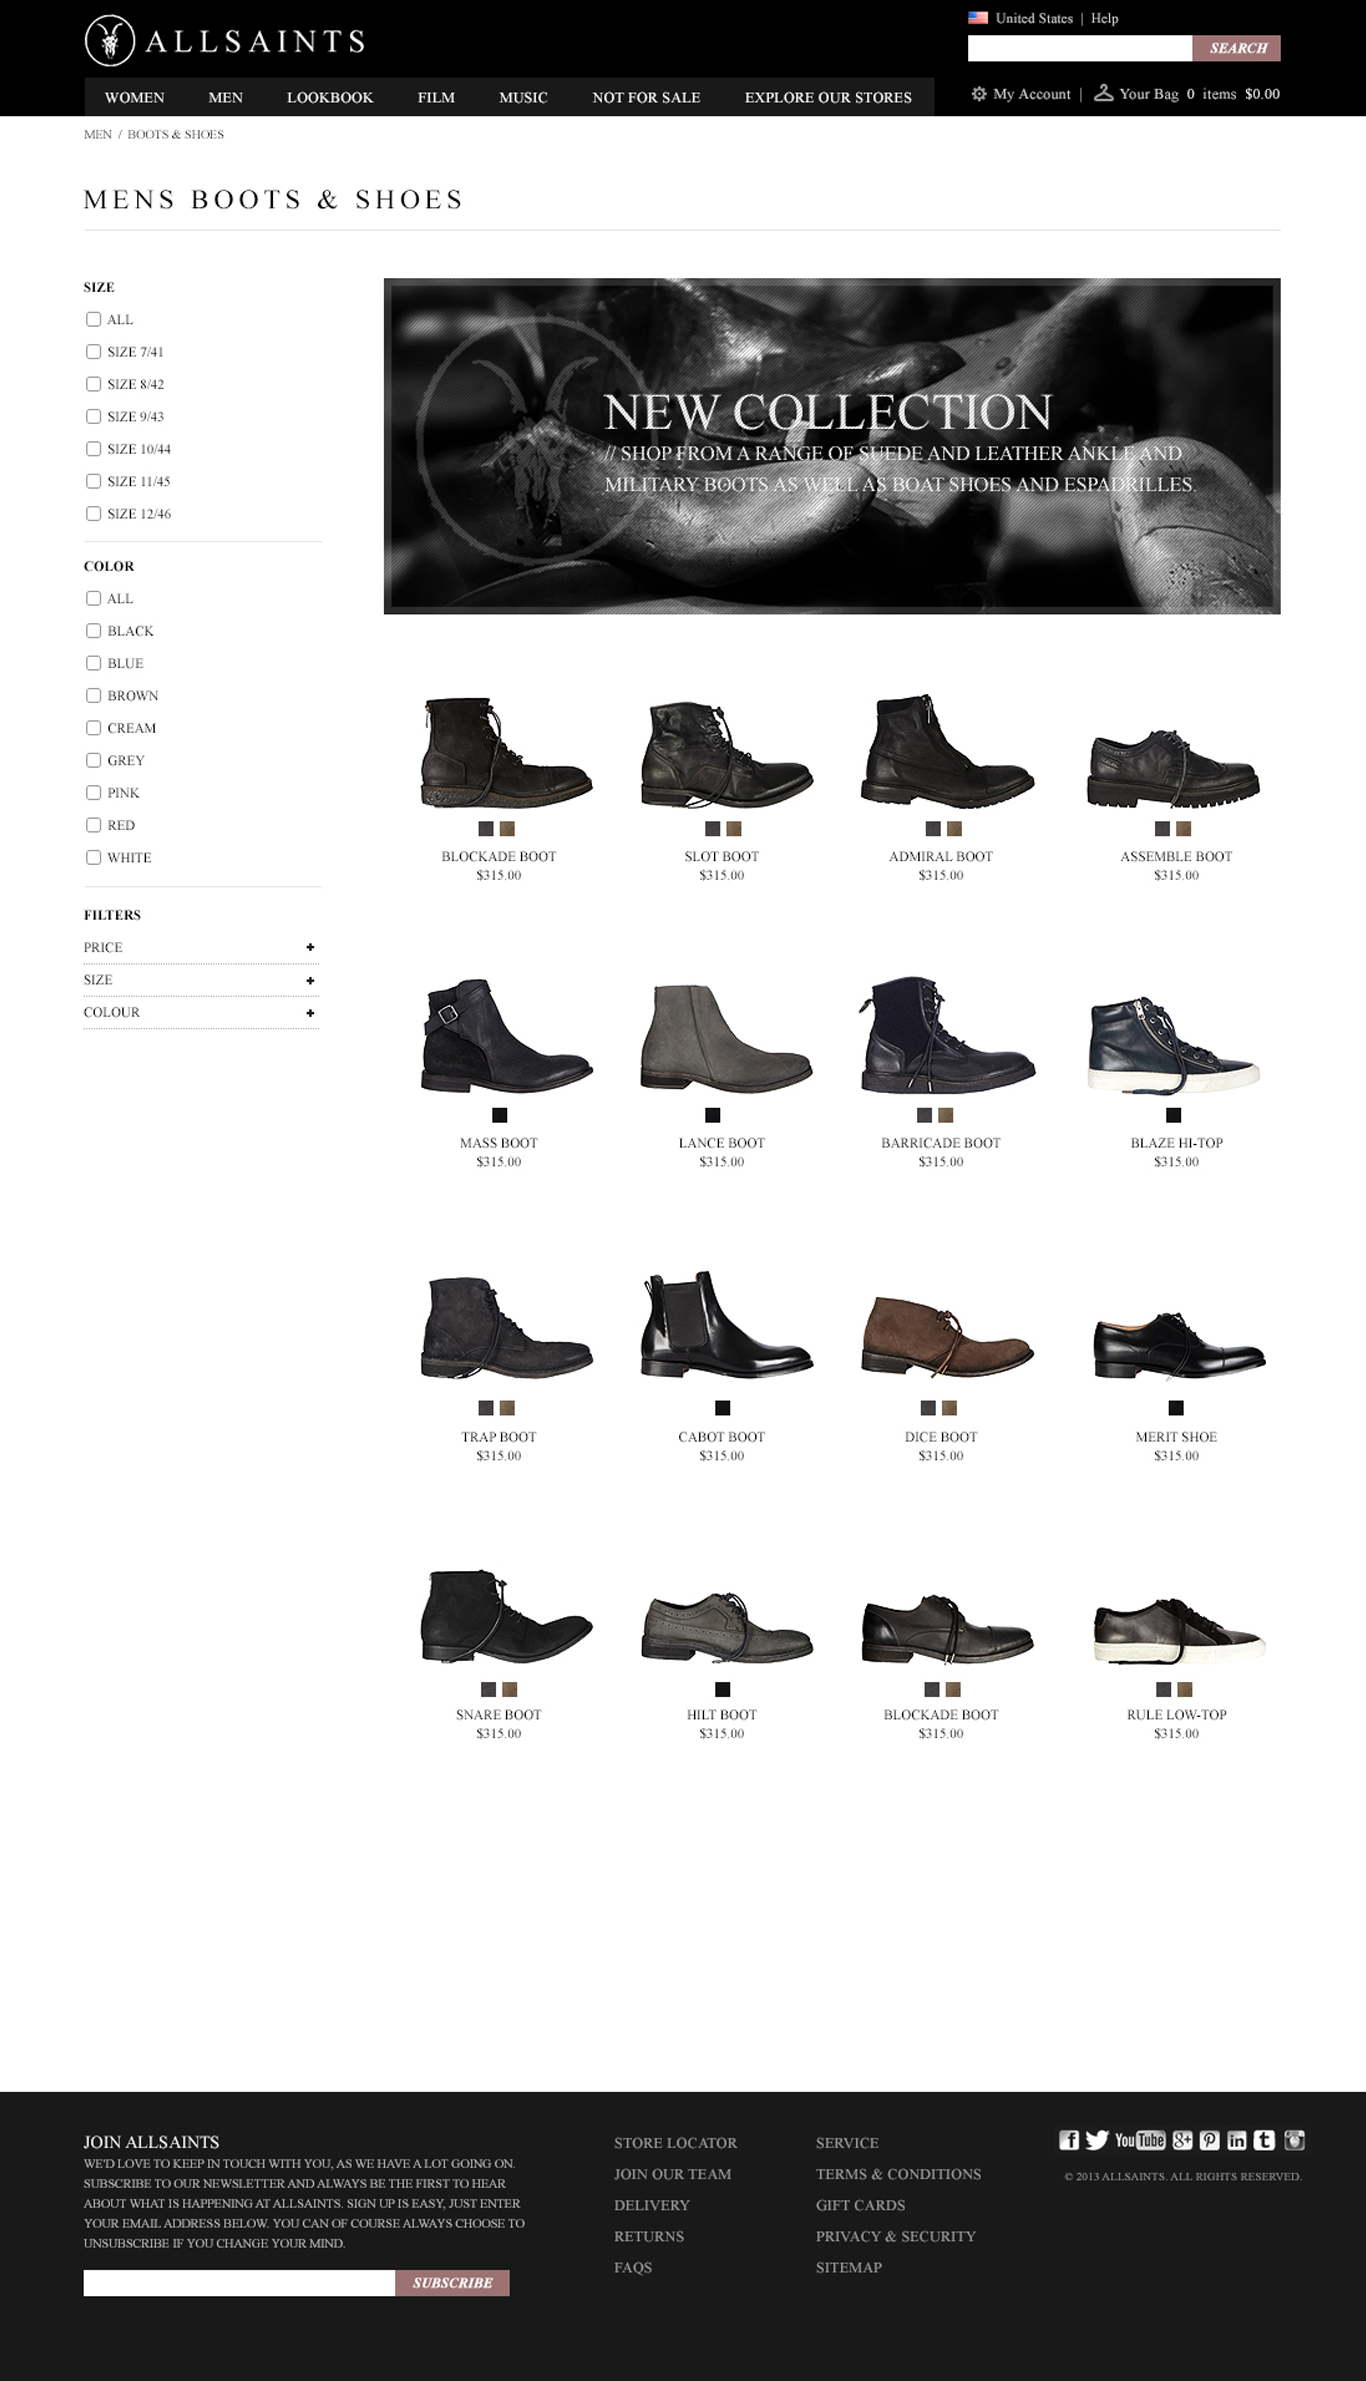 Homepage of AllSaints website featuring a sleek, modern design with a minimalist black and white color scheme. Prominent images showcase the latest fashion collections with models in stylish, contemporary outfits. Navigation bar at the top provides links to men's and women's apparel, new arrivals, and exclusive offers. The overall layout is clean and user-friendly, emphasizing urban chic aesthetics.